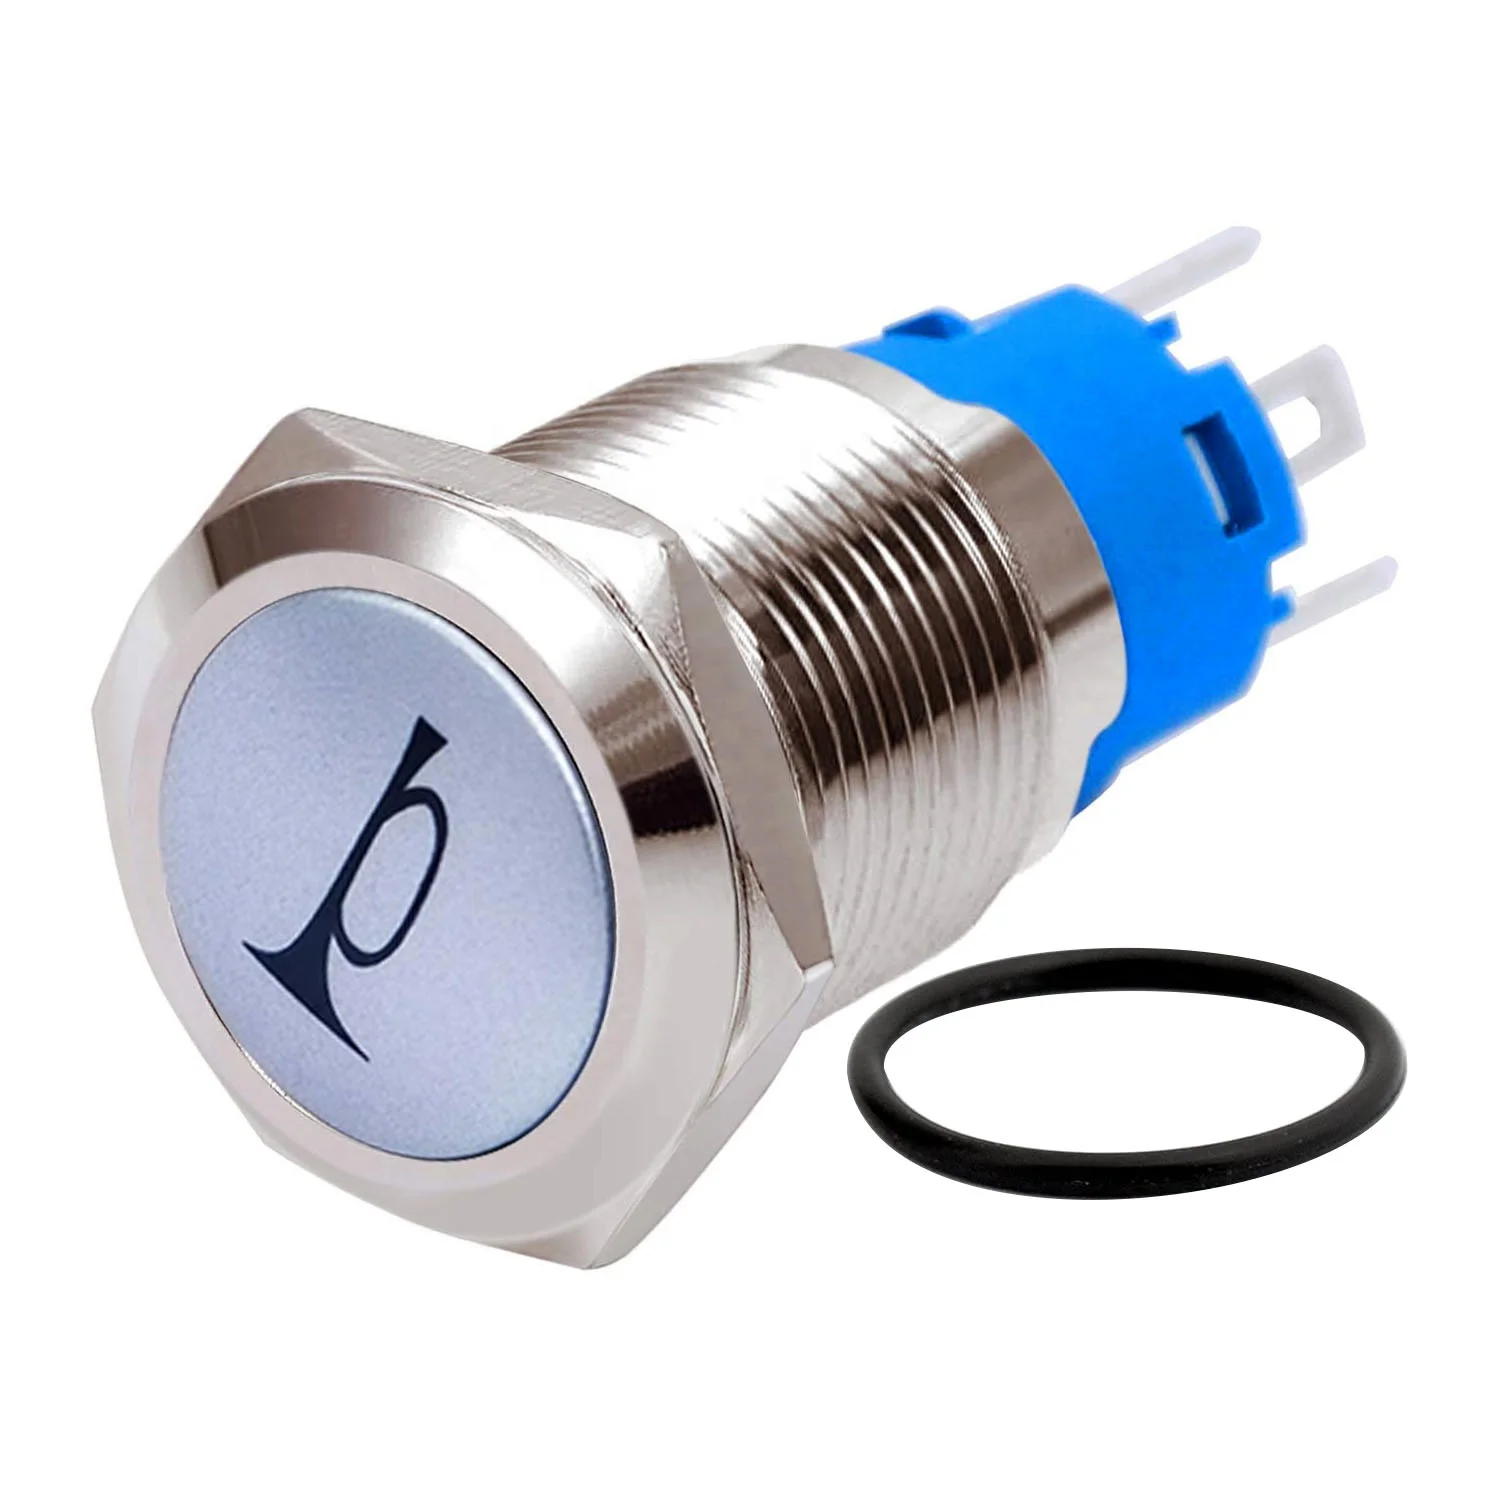 TWTADE 19 MM 12V Push Button Switch Car Auto Blue LED Light Momentary Ball Head Speaker Horn Push Button Metal Toggle Switch with Prewiring Wires HORNP19-BU